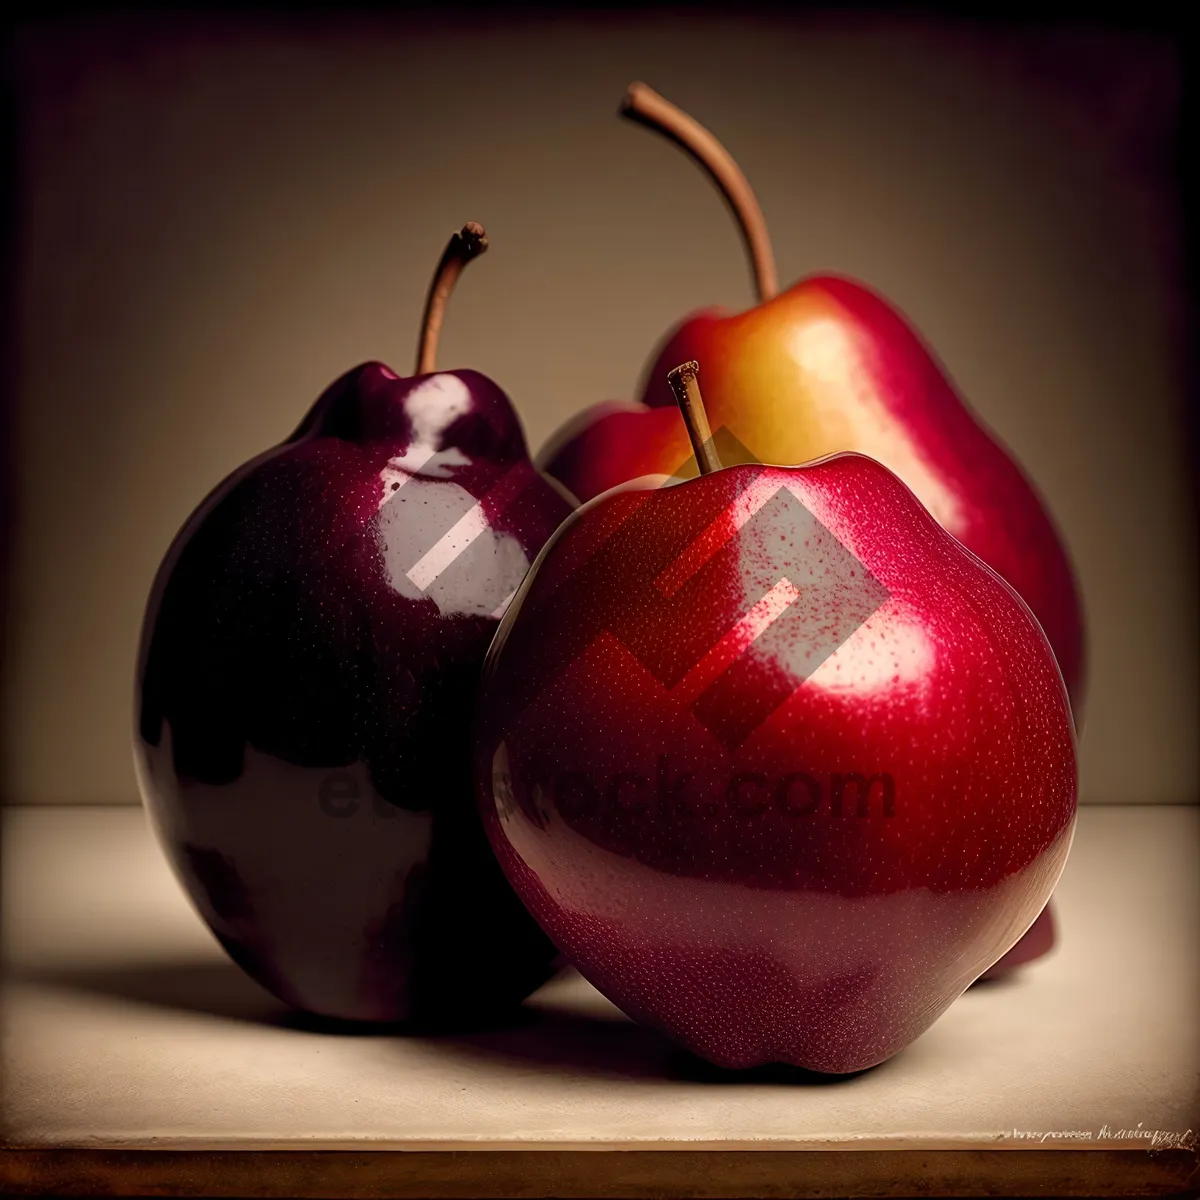 Picture of Juicy Red Delicious Apple, a Perfect Healthy Snack!